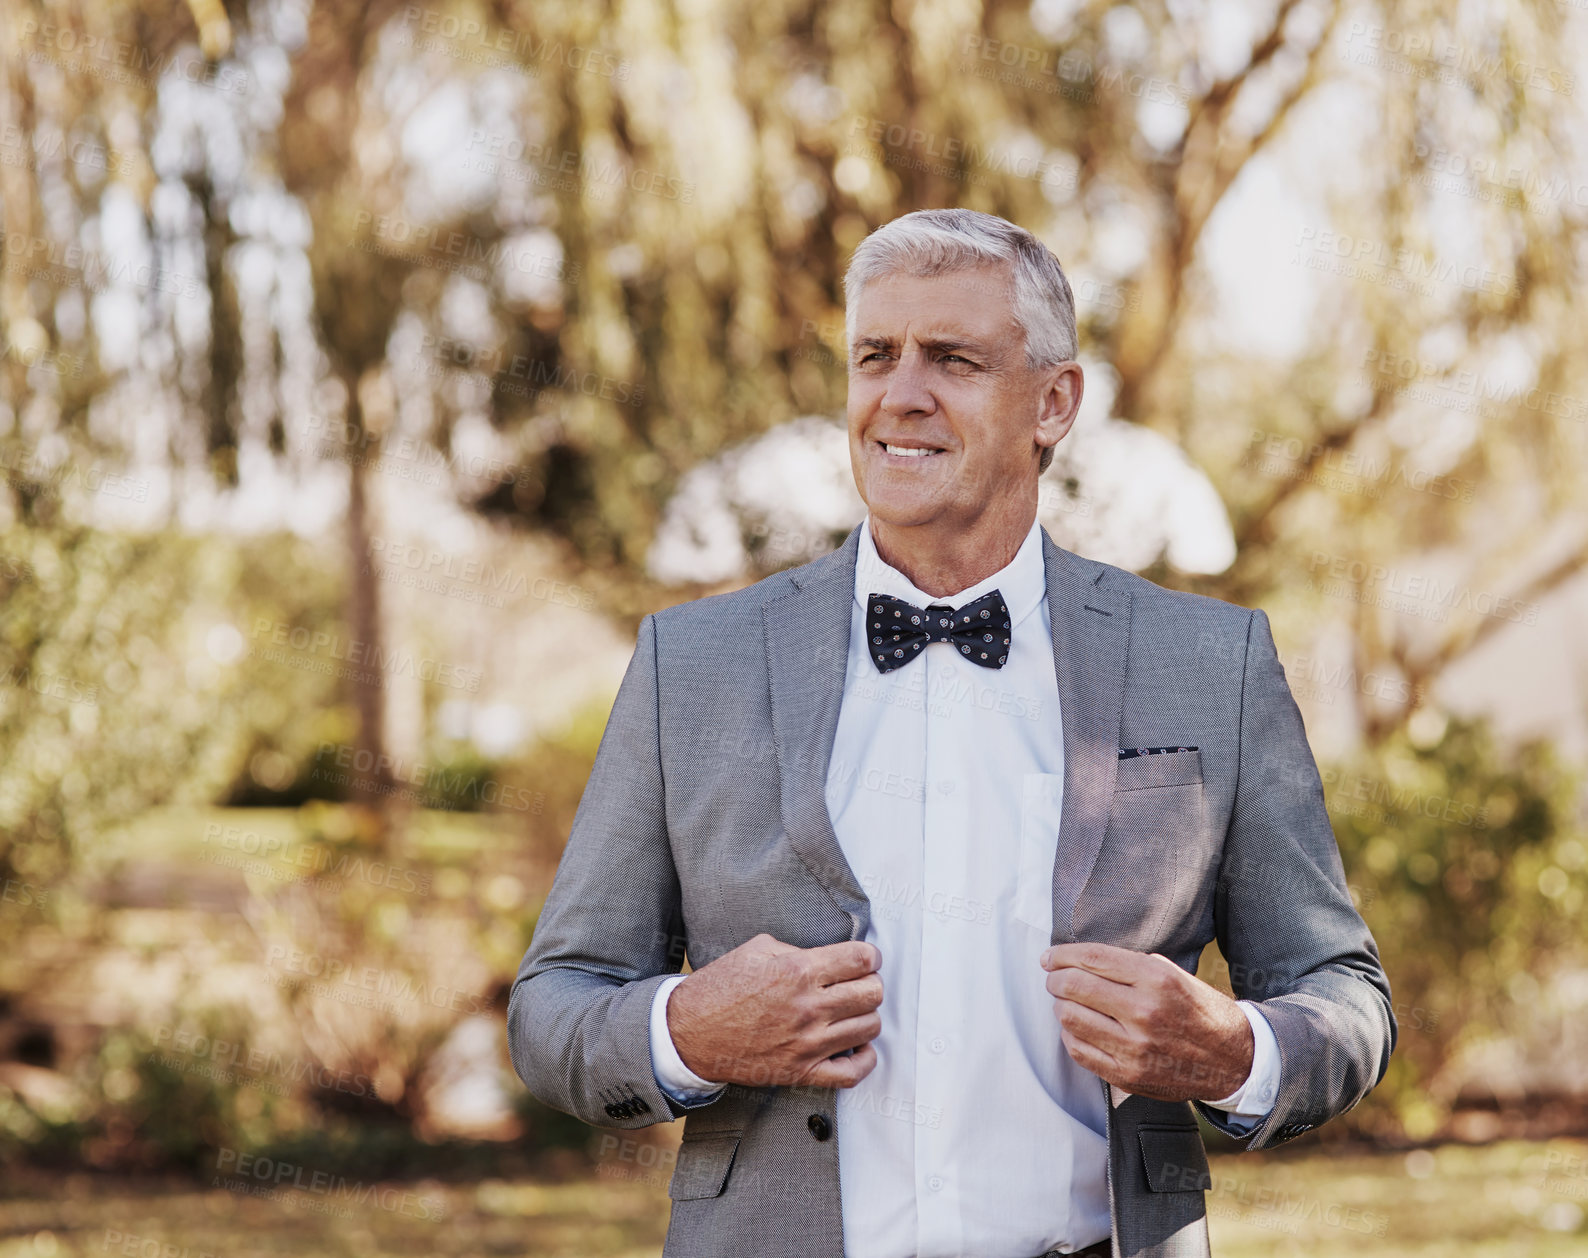 Buy stock photo Cropped shot of a handsome mature bridegroom looking thoughtful while adjusting his suit on his wedding day